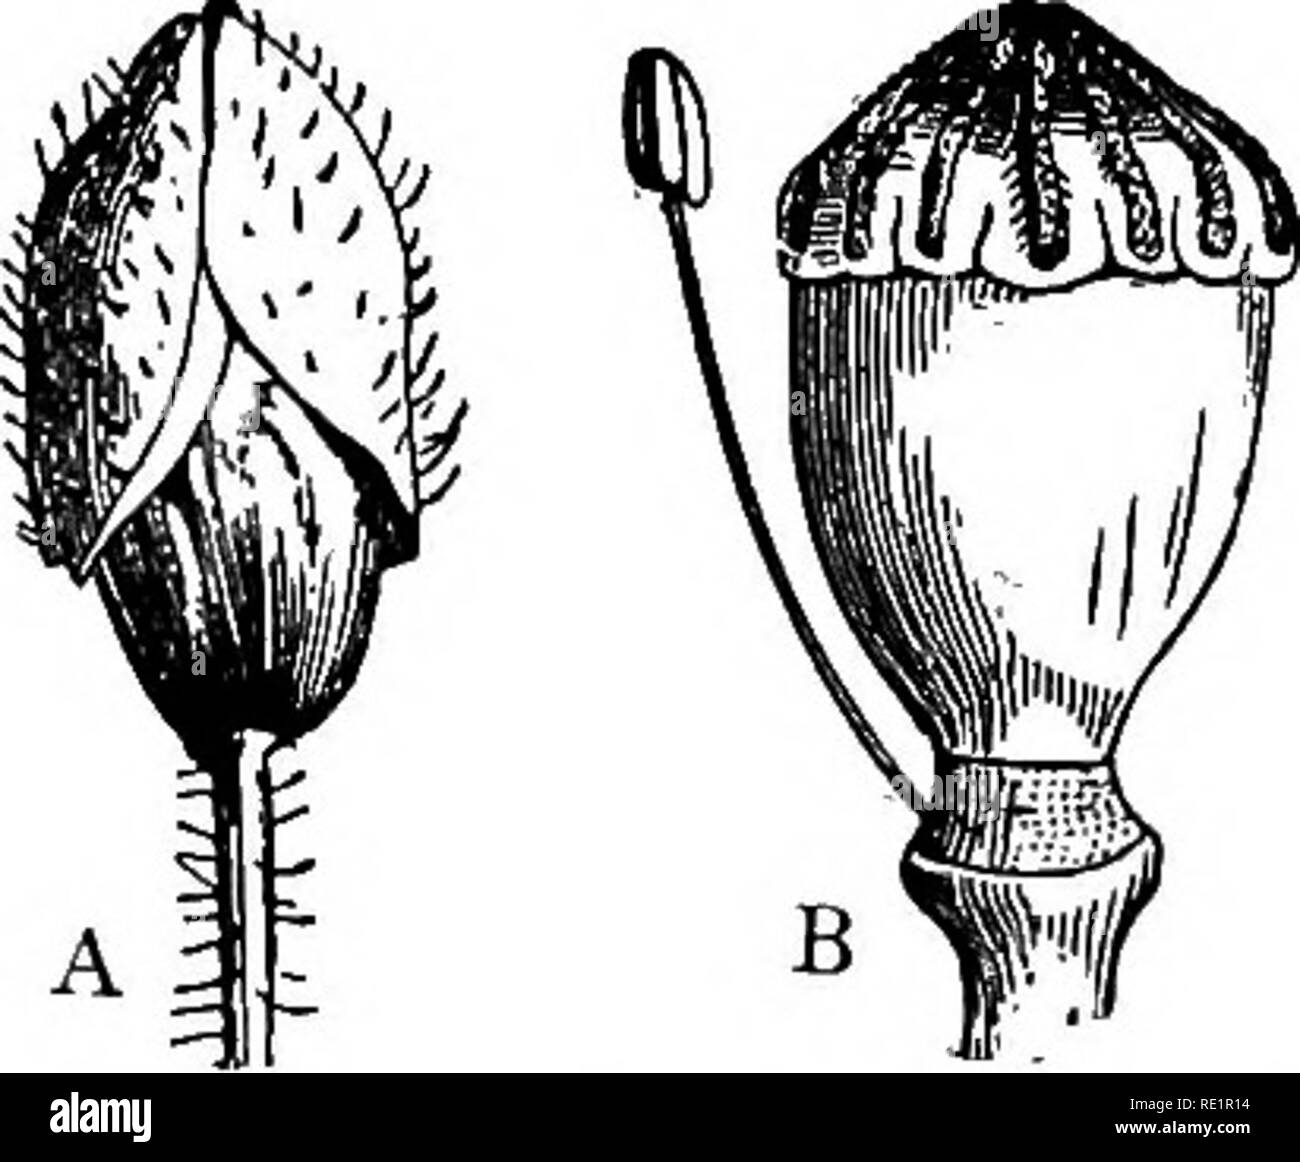 . A manual of Indian botany. Botany. i8o CLASSIFICATION times for opium, which is the inspissated millcy juice of the unripe capsule. The seeds of Poppy and shial- kanta yield a kind of oil which is used for lighting purposes. Papaver orientale and P. Argemone are com- monly grown in gardens during winter. The Order is characterized by mostly homogamous pollen flowers, like the two plants mentioned above. Nat. Order 8. Cruciferce.— Herbs, juice often pungent. Leaves radical, in a rosette, also cauline alternate. Stipules o. Flowers in racemes, without bracts. Sepals 4, in 2 whorls.. Fig. 150.— Stock Photo